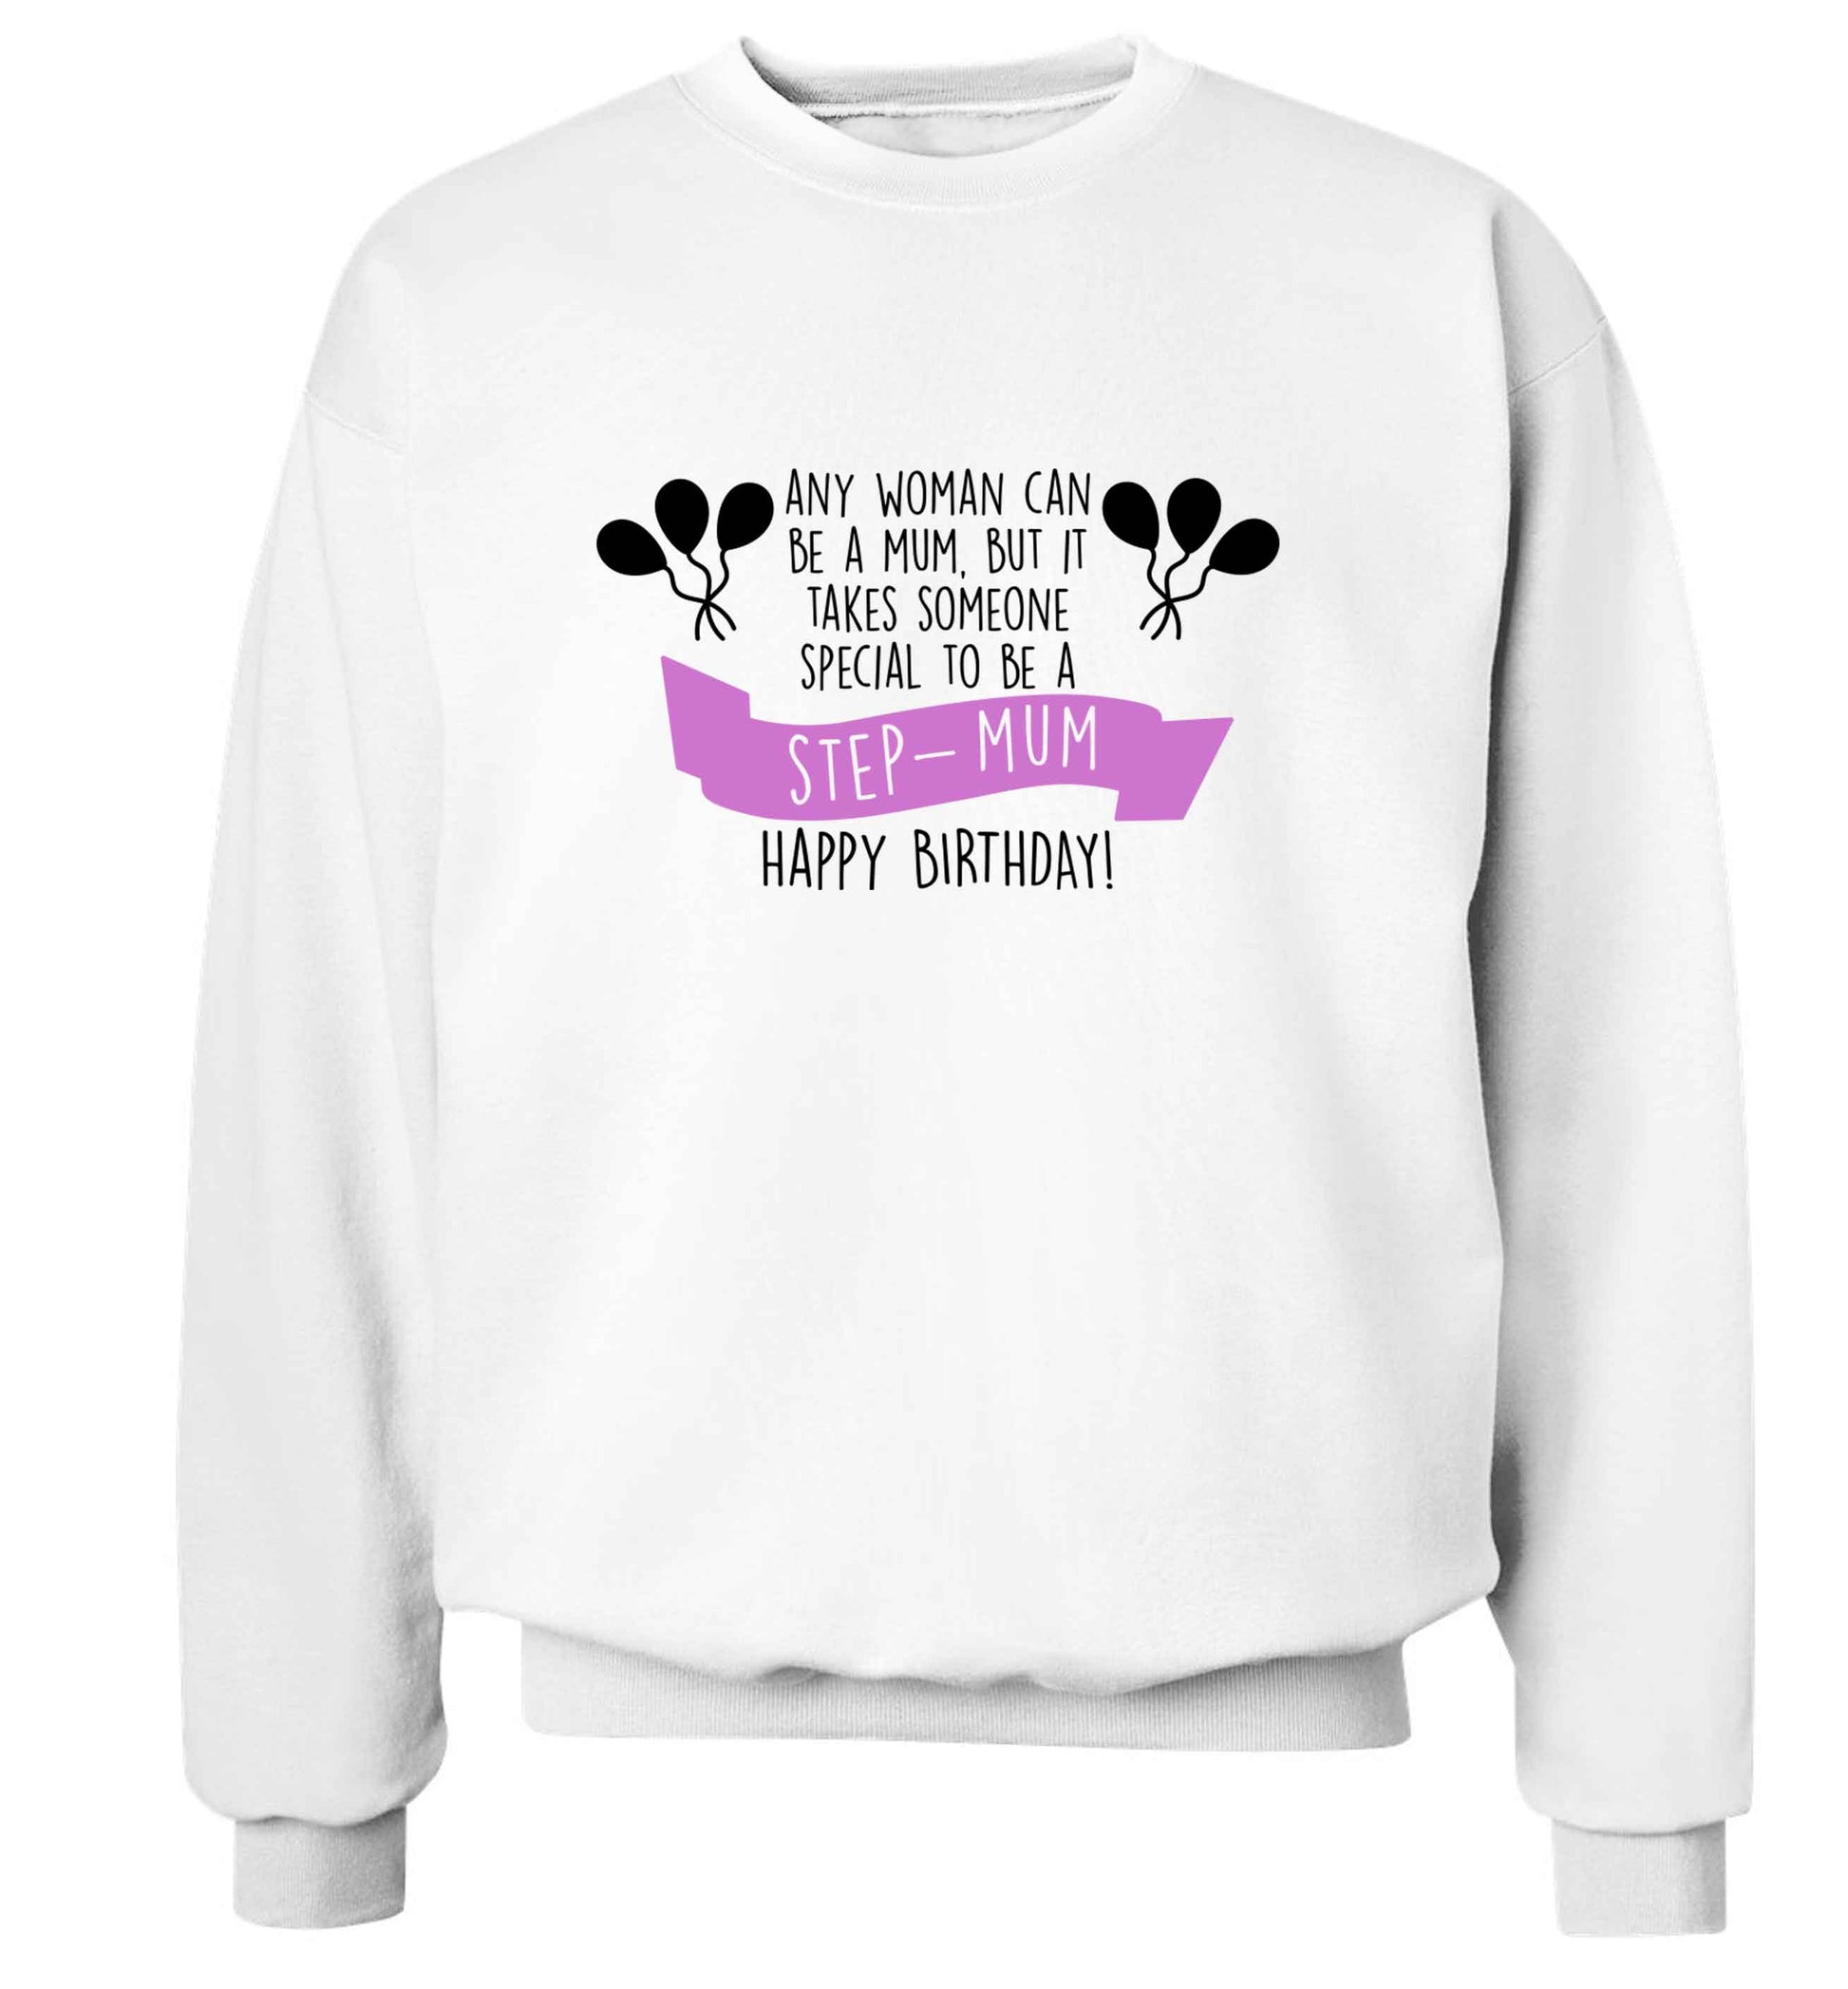 Takes someone special to be a step-mum, happy birthday! adult's unisex white sweater 2XL